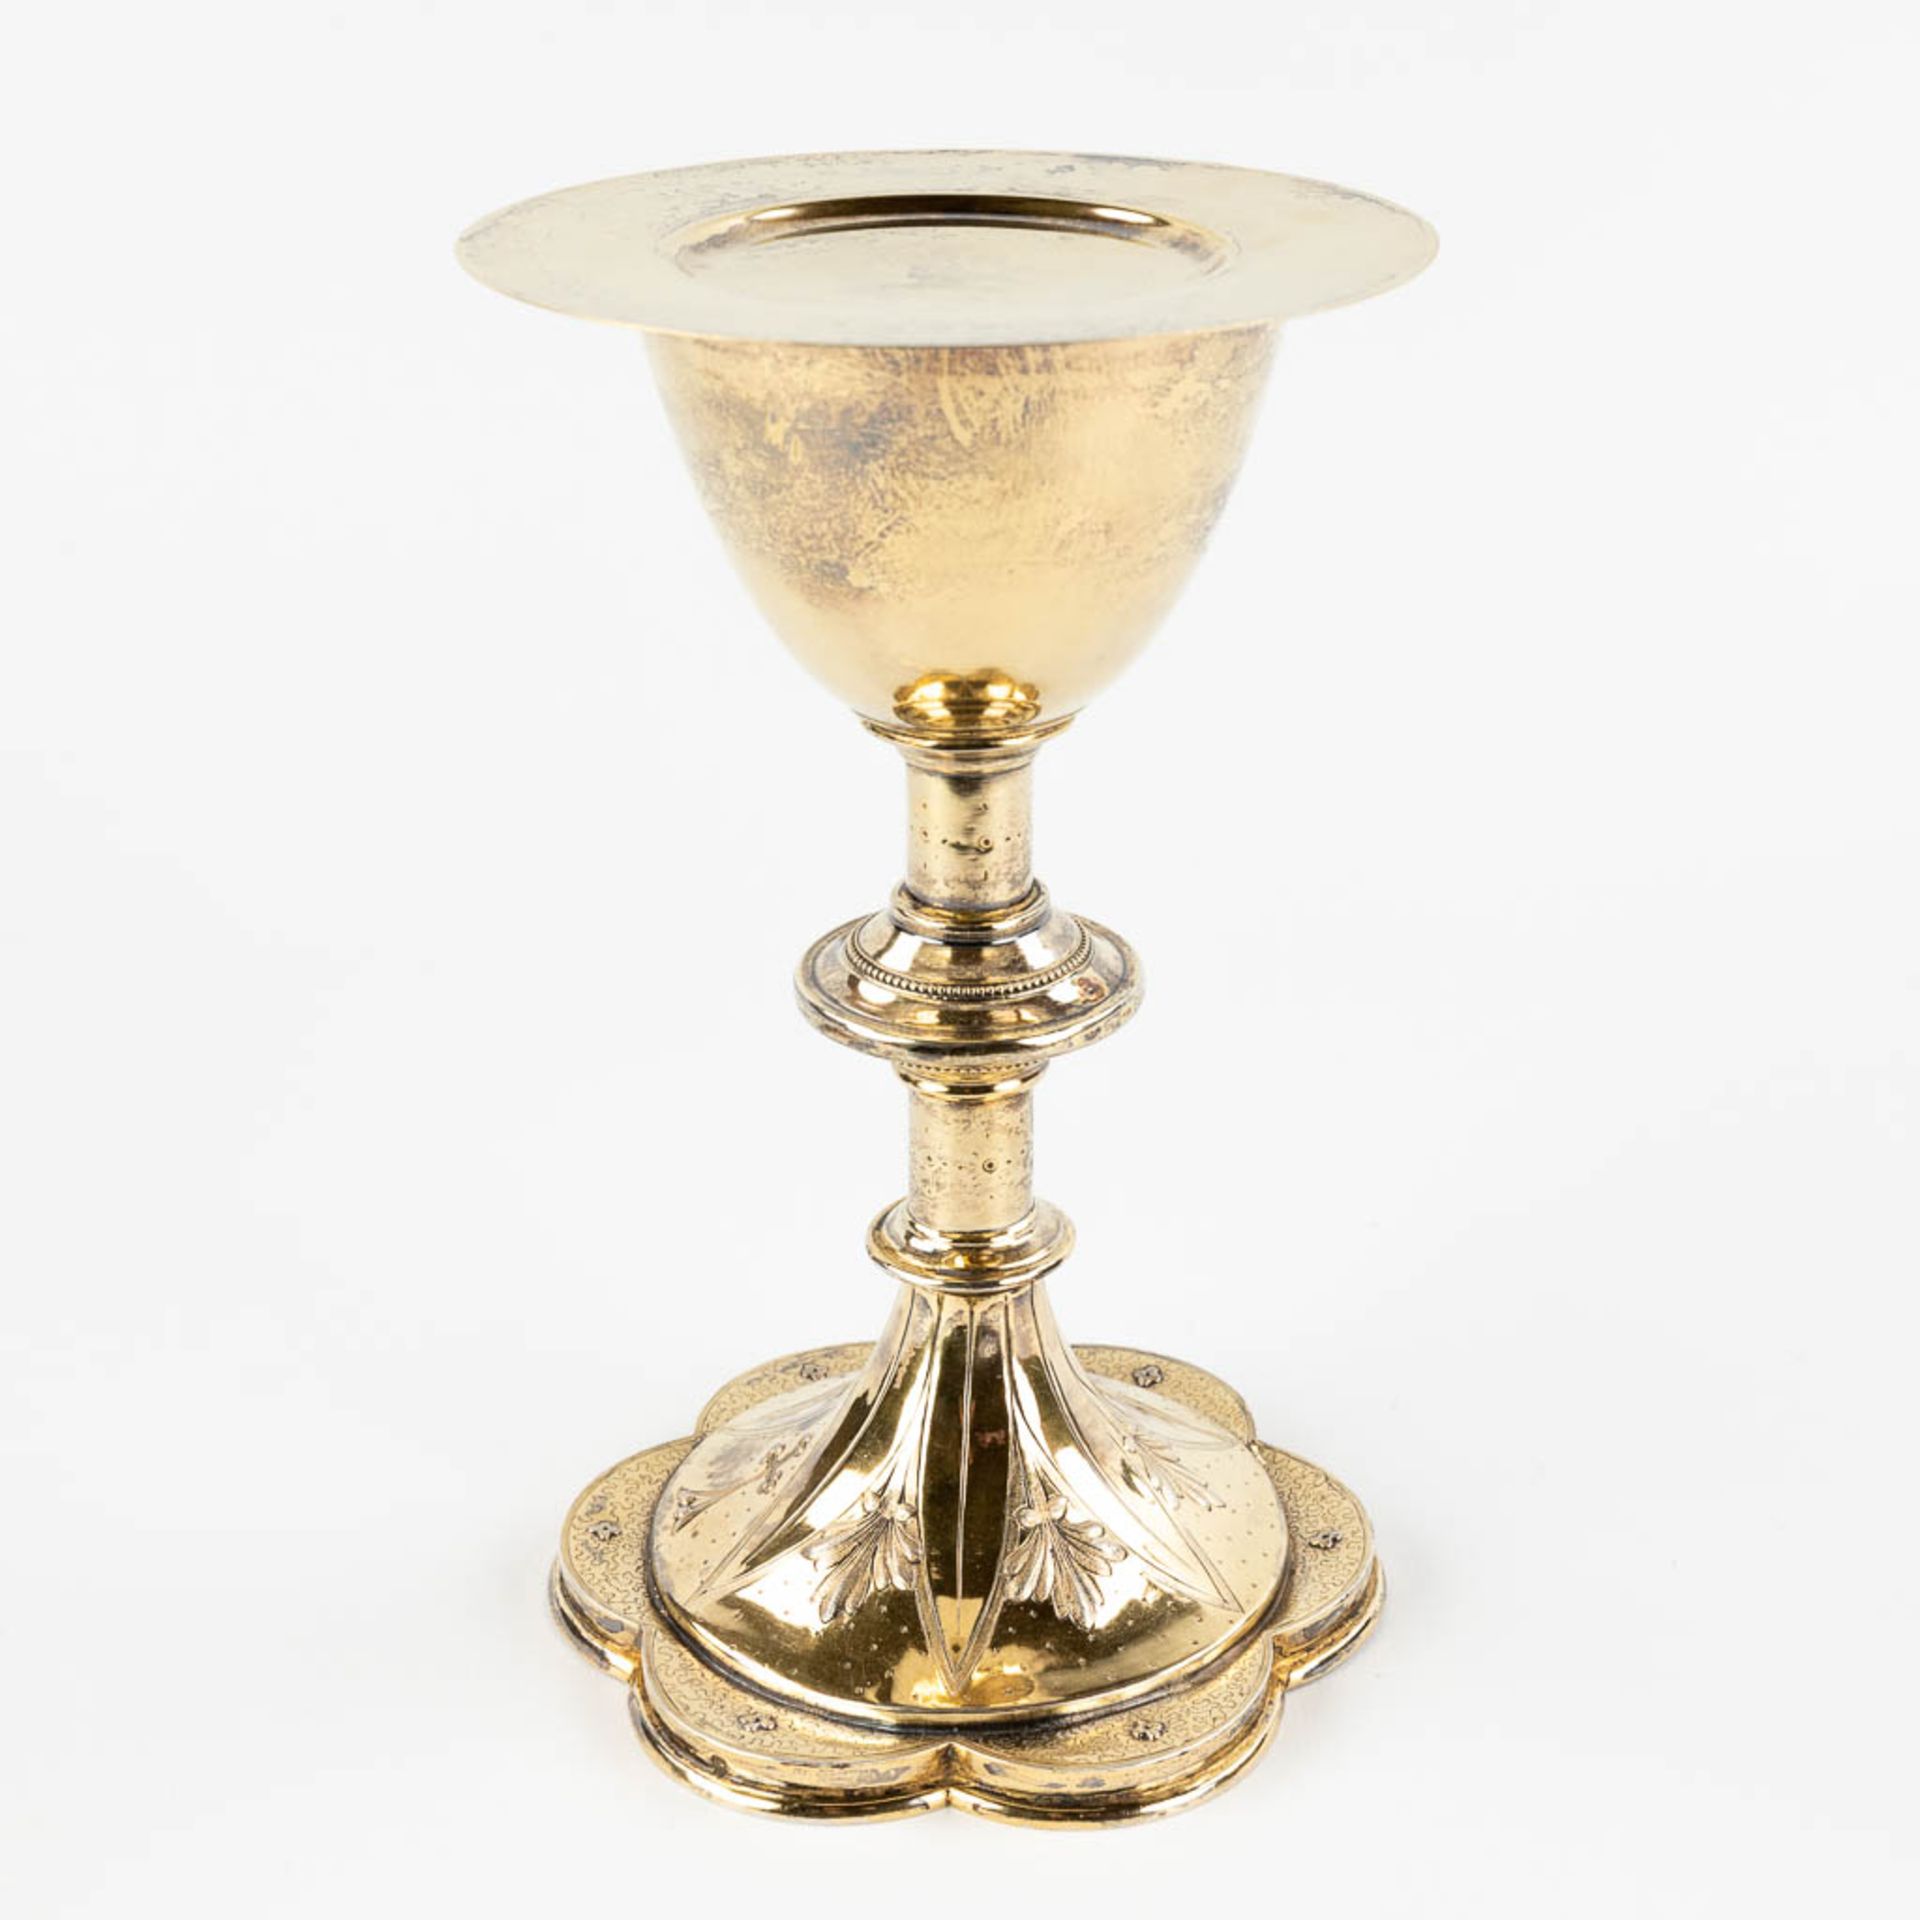 A Chalice with paten, gilt silver in gothic revival style. 305g. (H:19,5 x D:12,5 cm) - Image 6 of 16